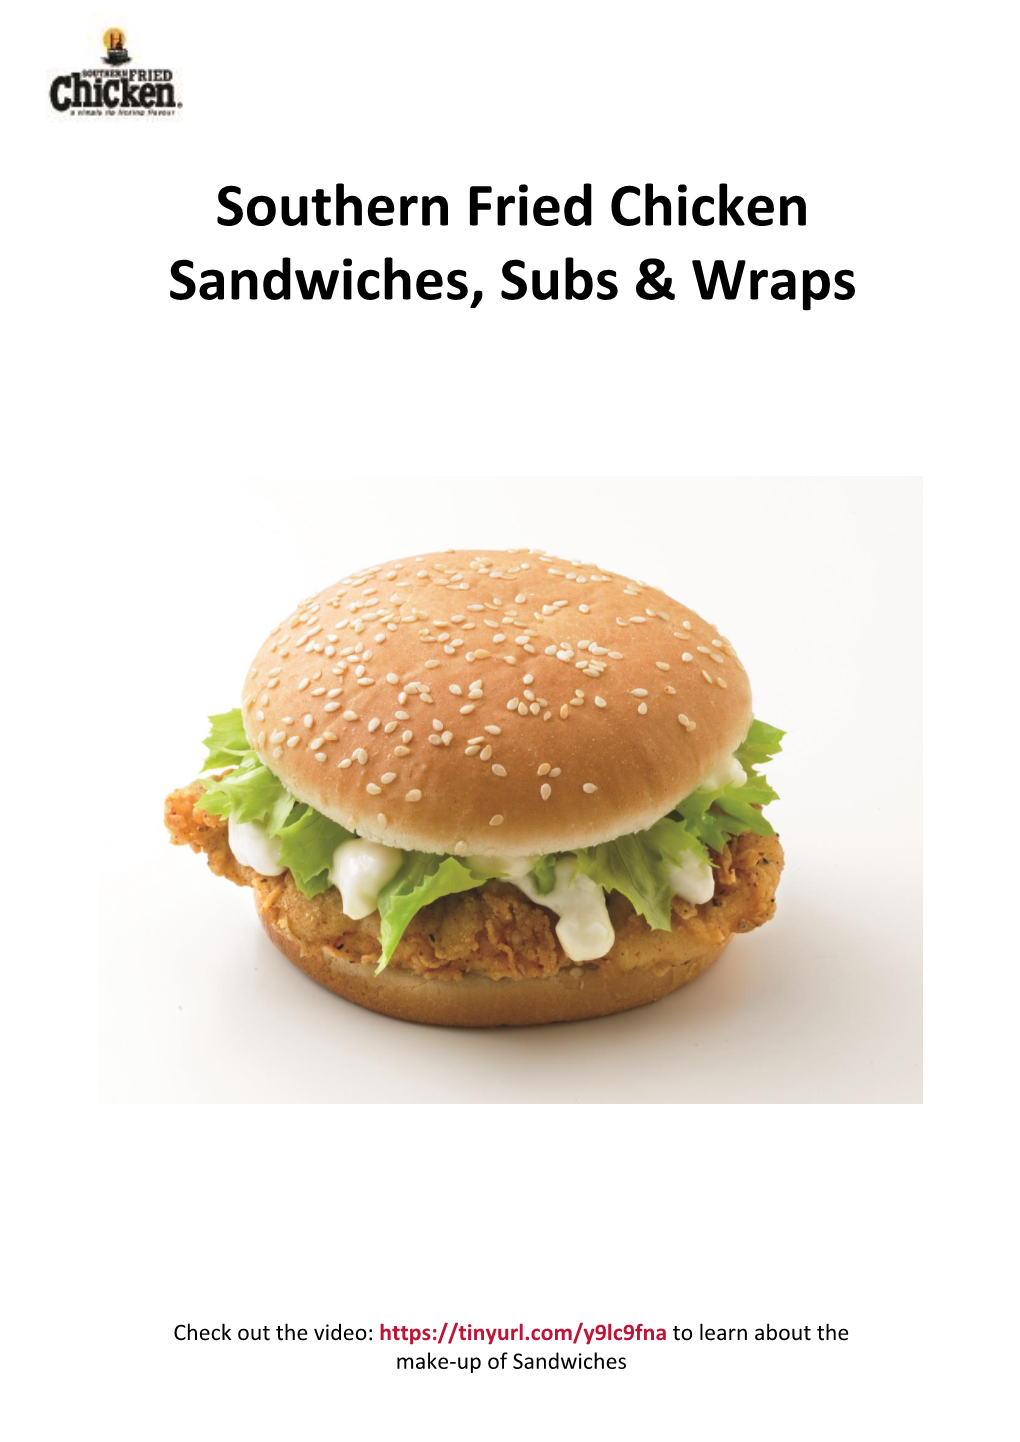 Southern Fried Chicken Sandwiches, Subs & Wraps